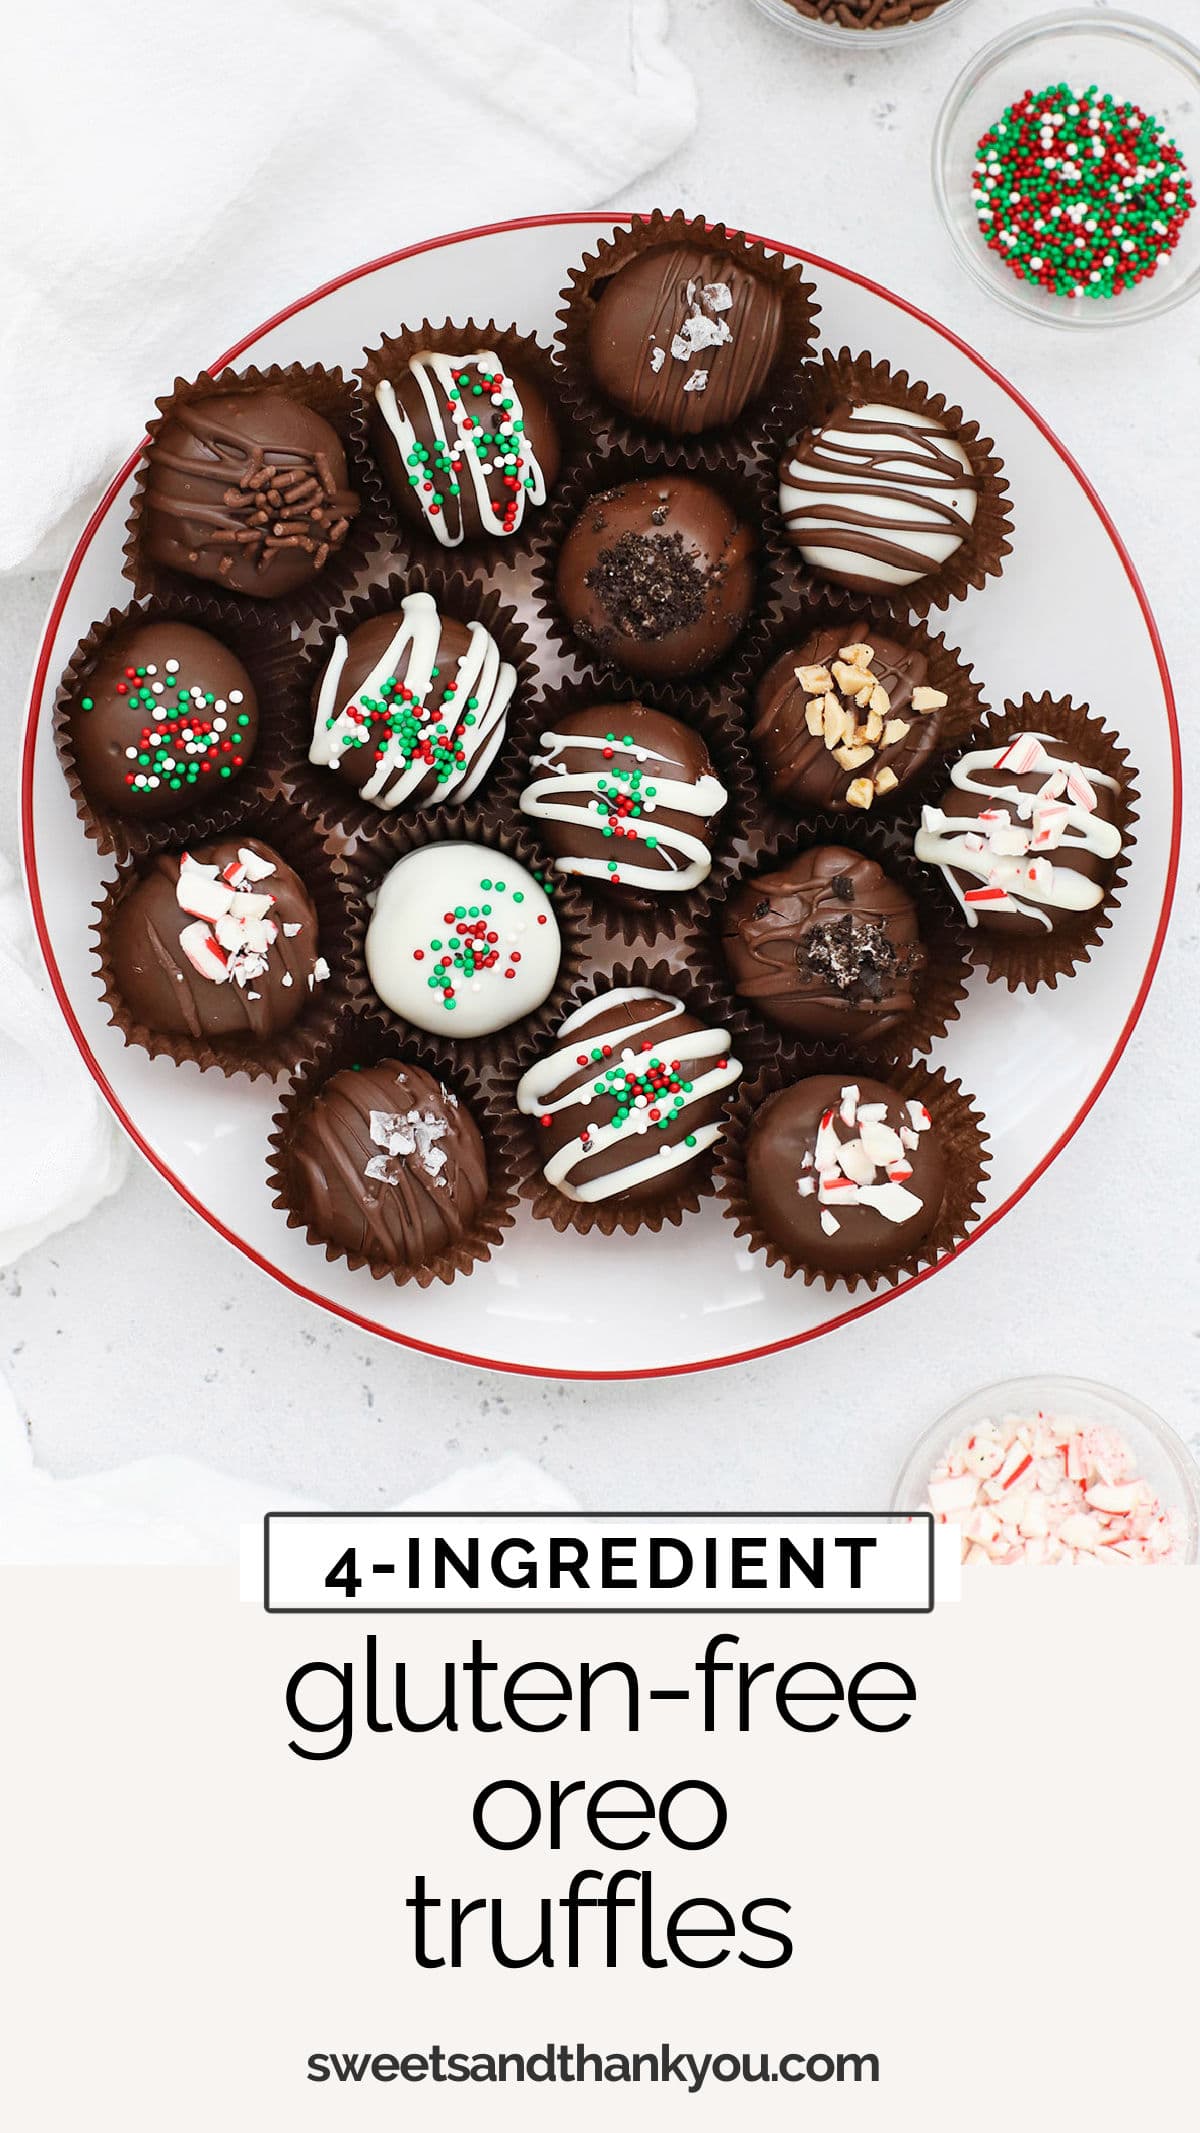 Easy Gluten-Free Oreo Truffles - This gluten-free oreo balls recipe is a perfect holiday treat to share with friends & neighbors. (Don't miss our yummy variations!) // Gluten-Free Peppermint Oreo Truffles // Gluten-free Oreo truffle recipe // gluten-free oreo ball recipe // gluten-free no-bake treat // gluten-free no-bake holiday treats // gluten-free no-bake christmas treats // gluten-free Oreo treats // gluten-free christmas recipe / gluten-free holiday recipe / gluten-free Christmas dessert  